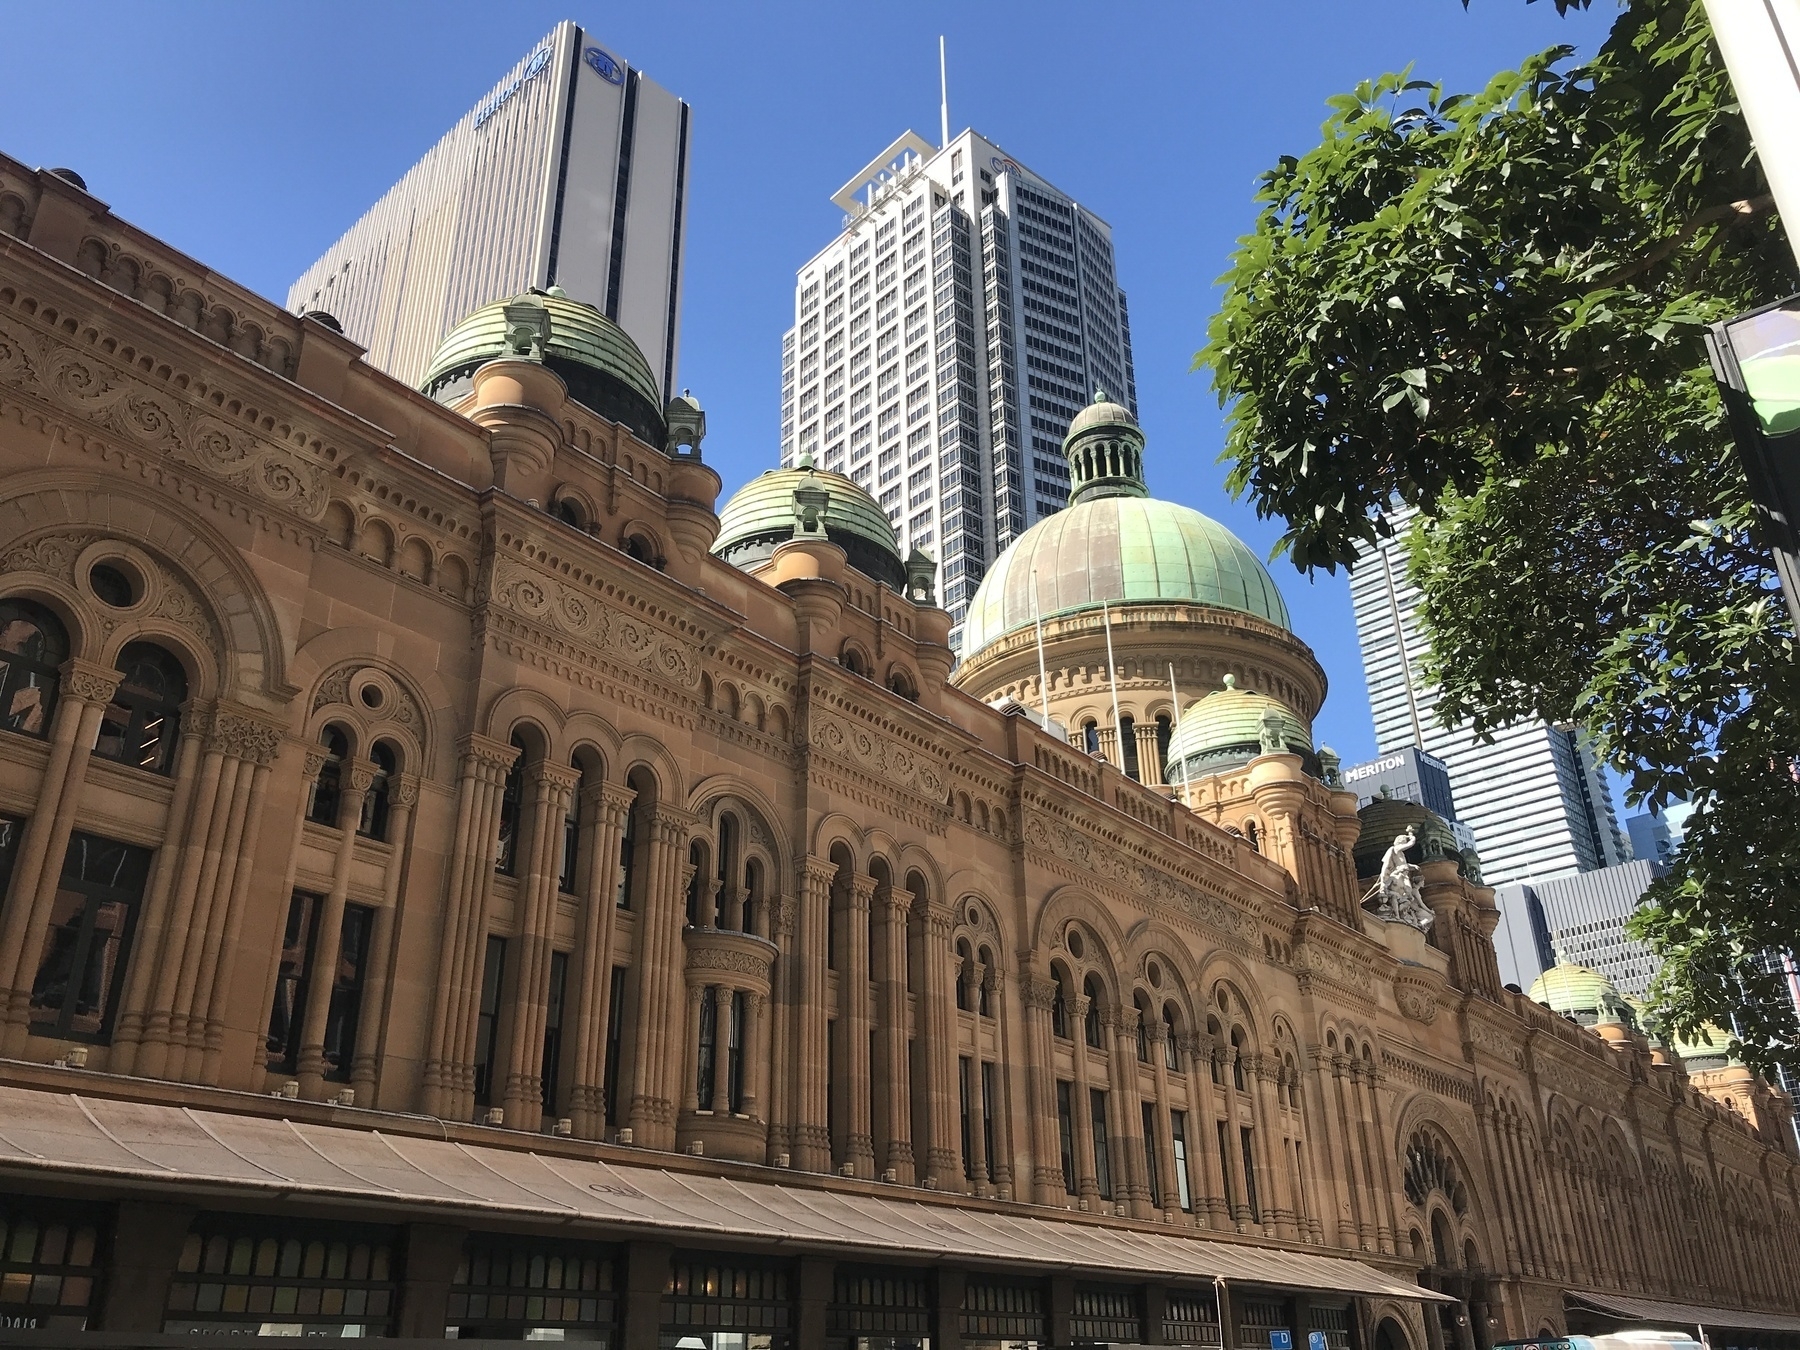 A long building made of sandstone stretches into the distance, topped with copper domes that have aged to green. The ground floor is all windows beneath a light and graceful awning. Above this are many ornate arched facades rising two storeys, bisected by horizontal stone bands that separate the lower, tall, rectangular windows from the shorter arched windows above. The wall continues above these with bands of high and low relief, rising to a separate tier supporting the towers topped by copper domes. Tall, modern buildings rise in the background against a bright blue sky.